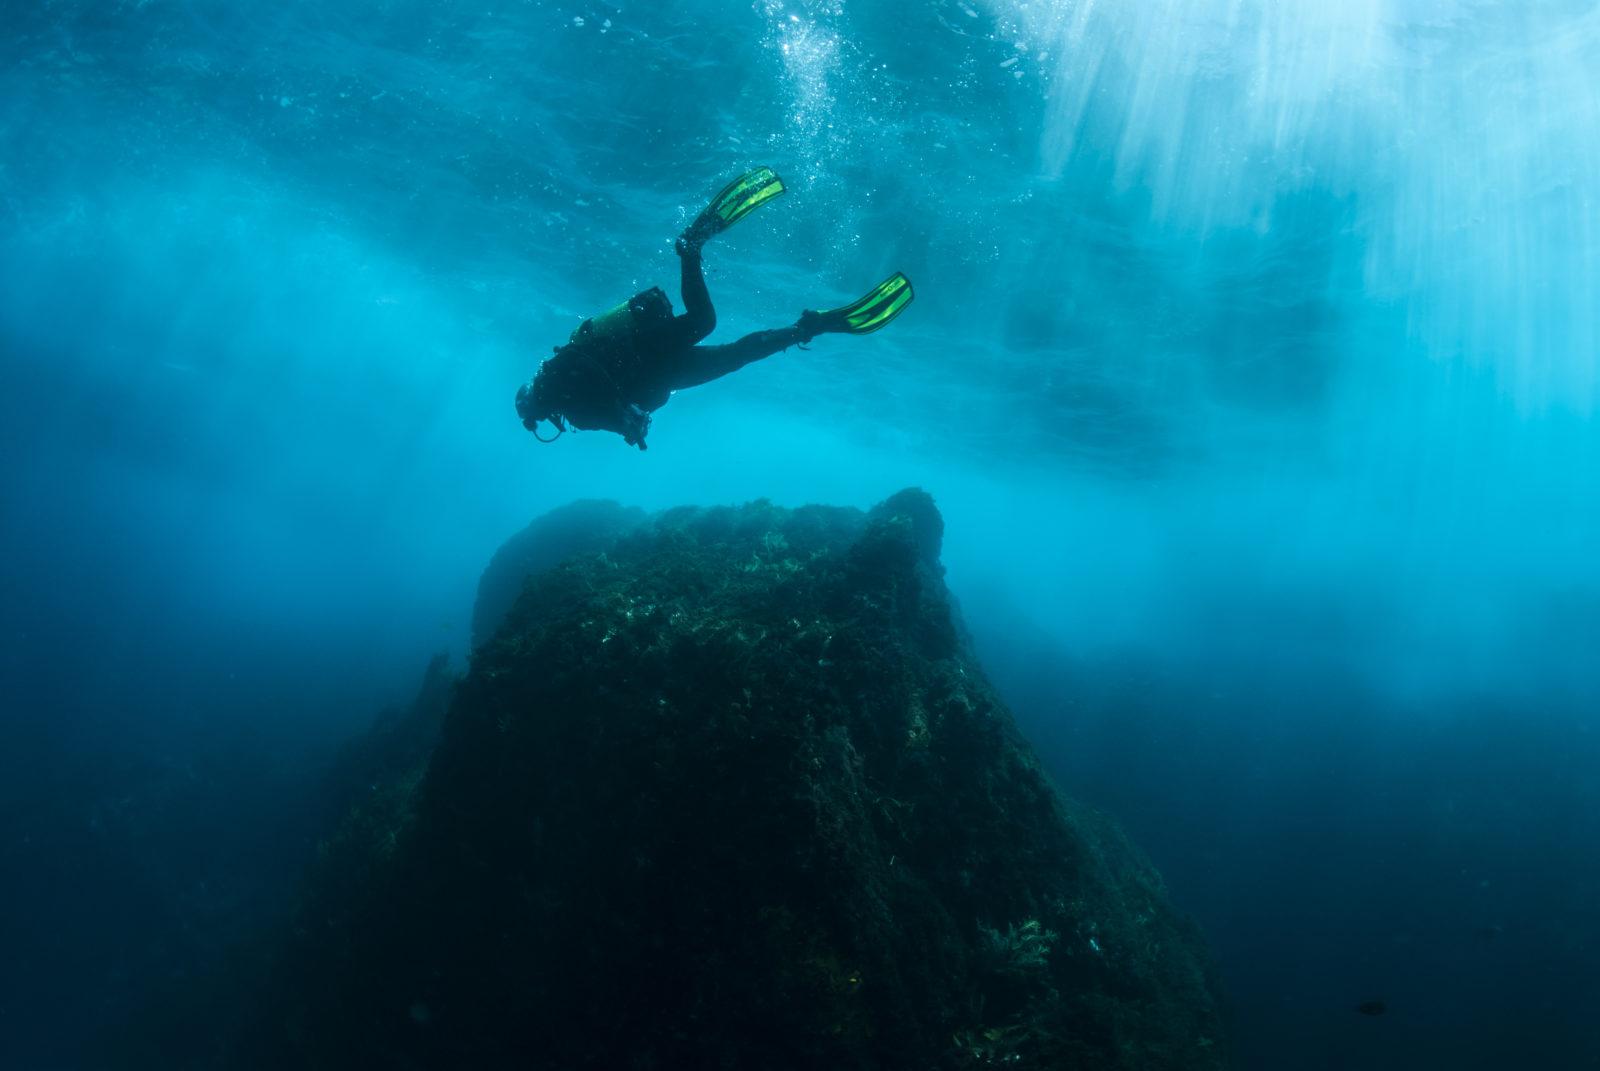 Diver swimming over Rock at Mokohinau Islands by Alex Stammers